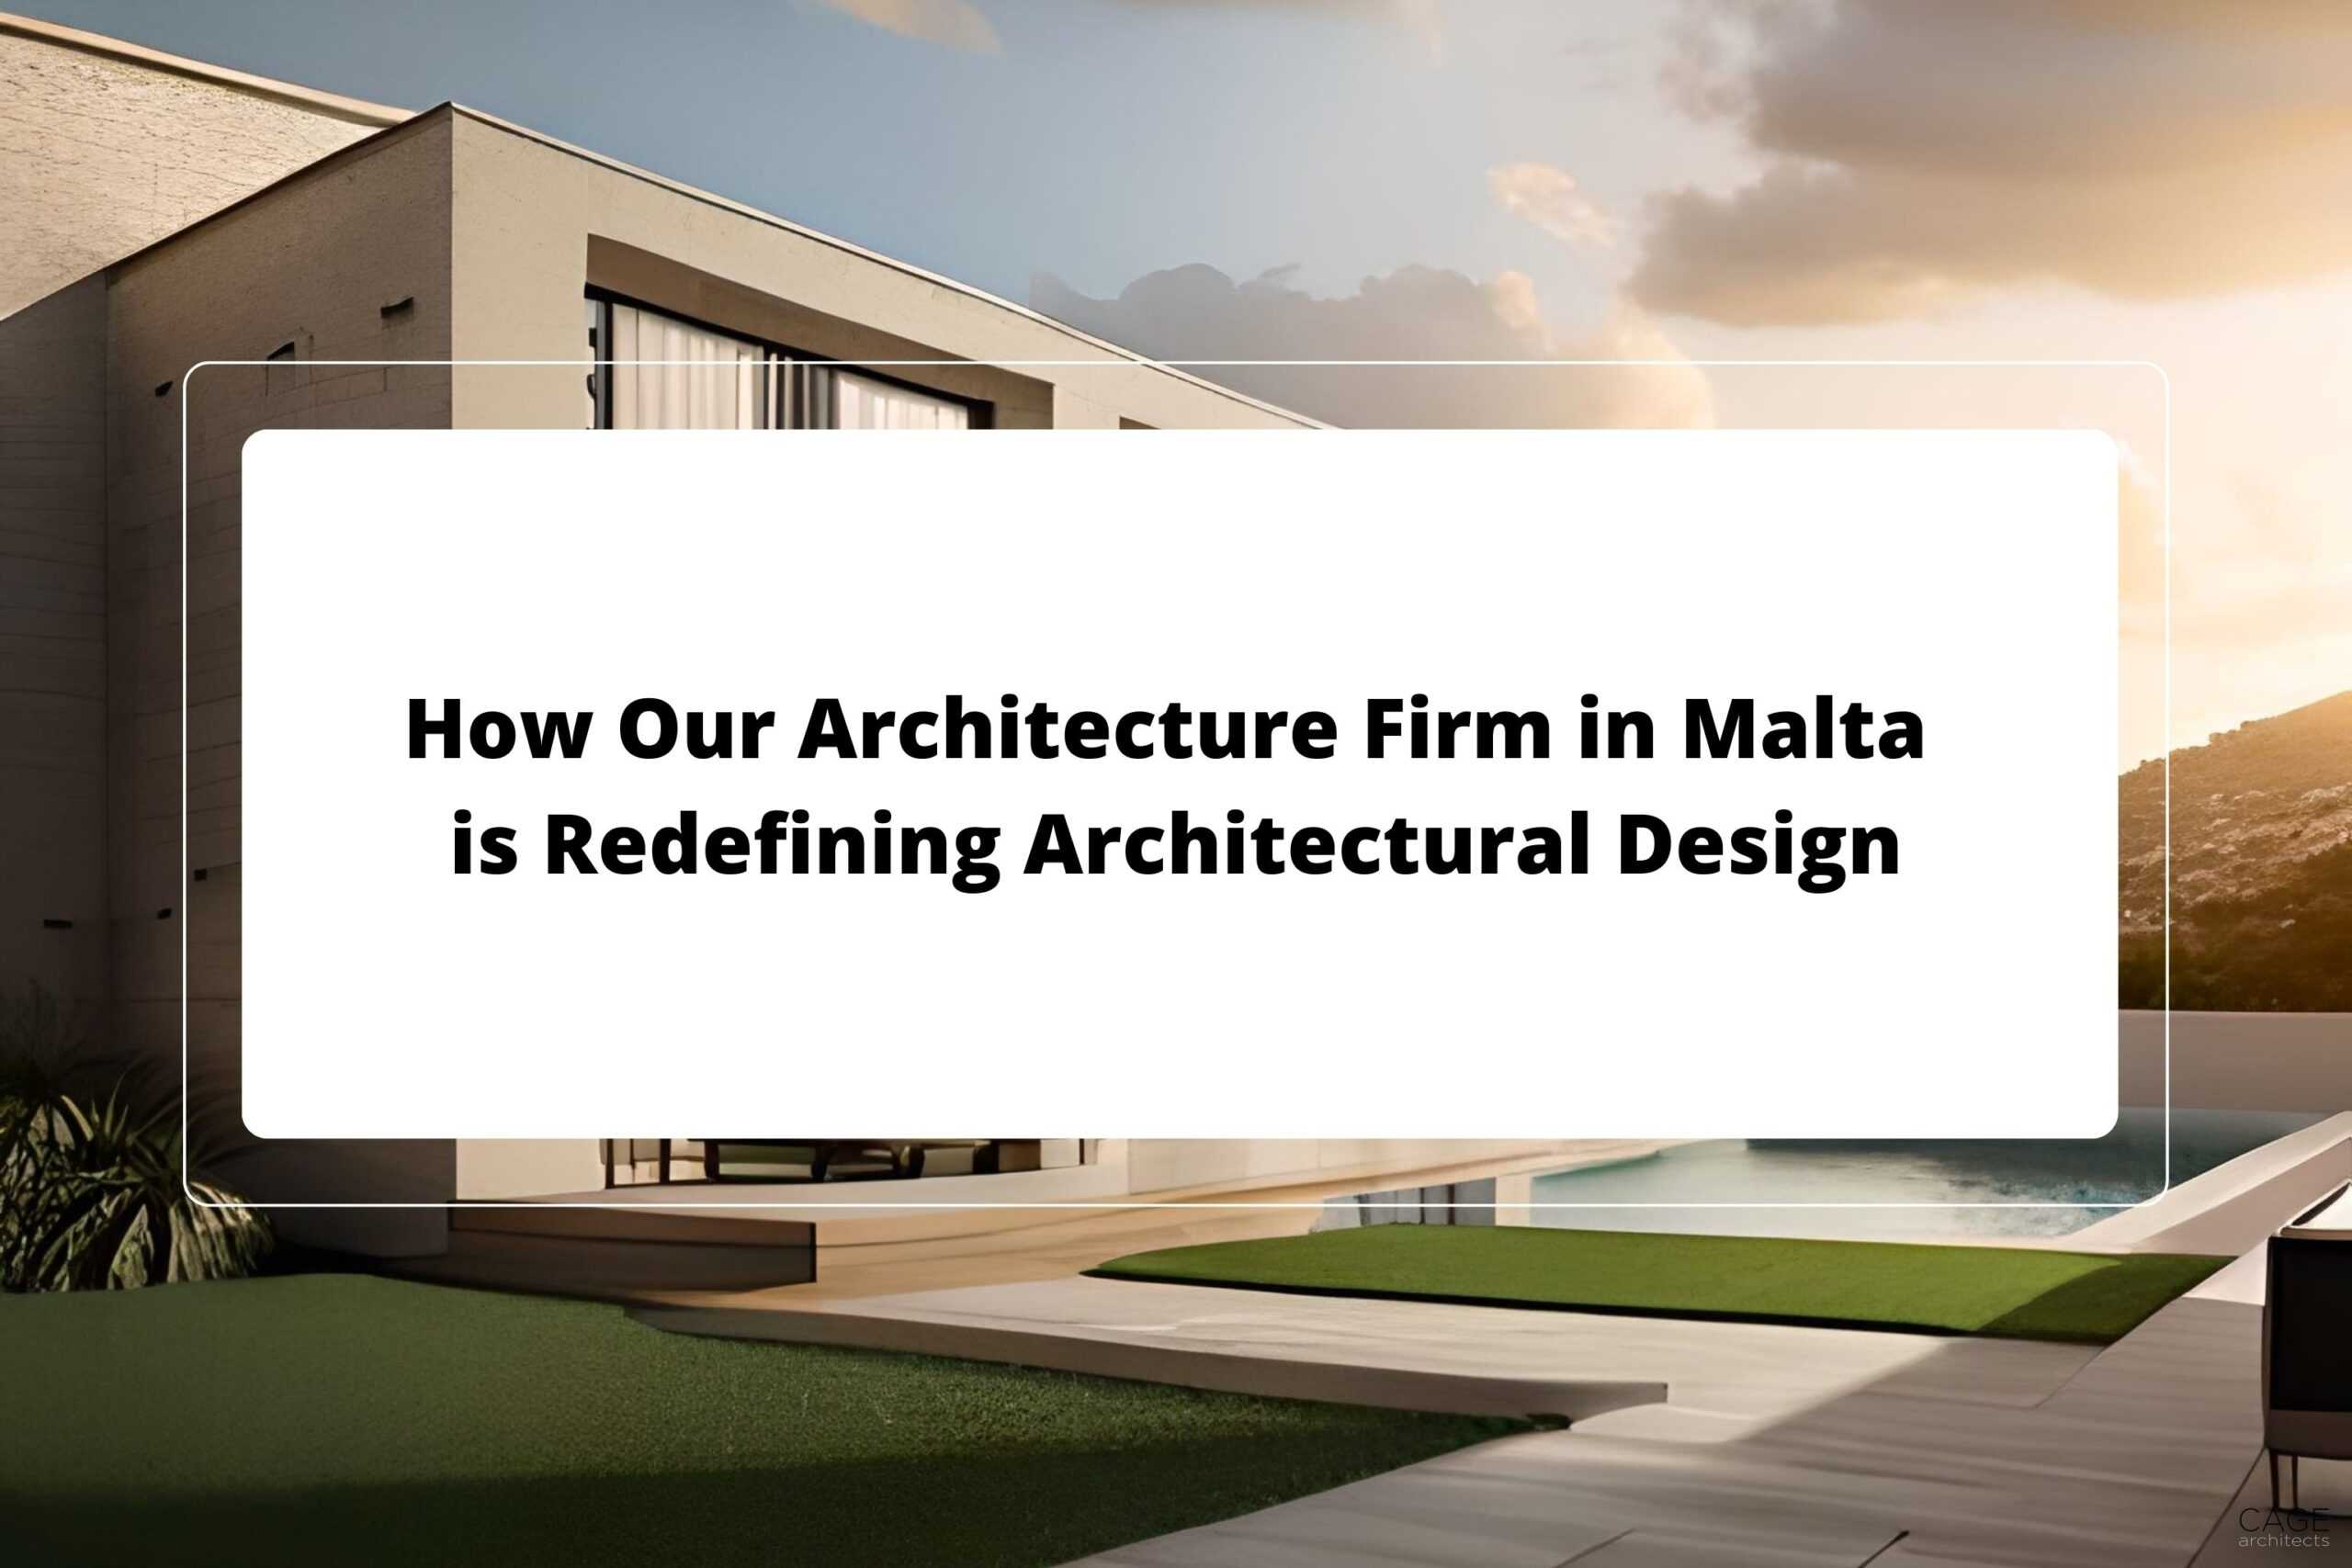 How Our Architecture Firm in Malta is Redefining Architectural Design